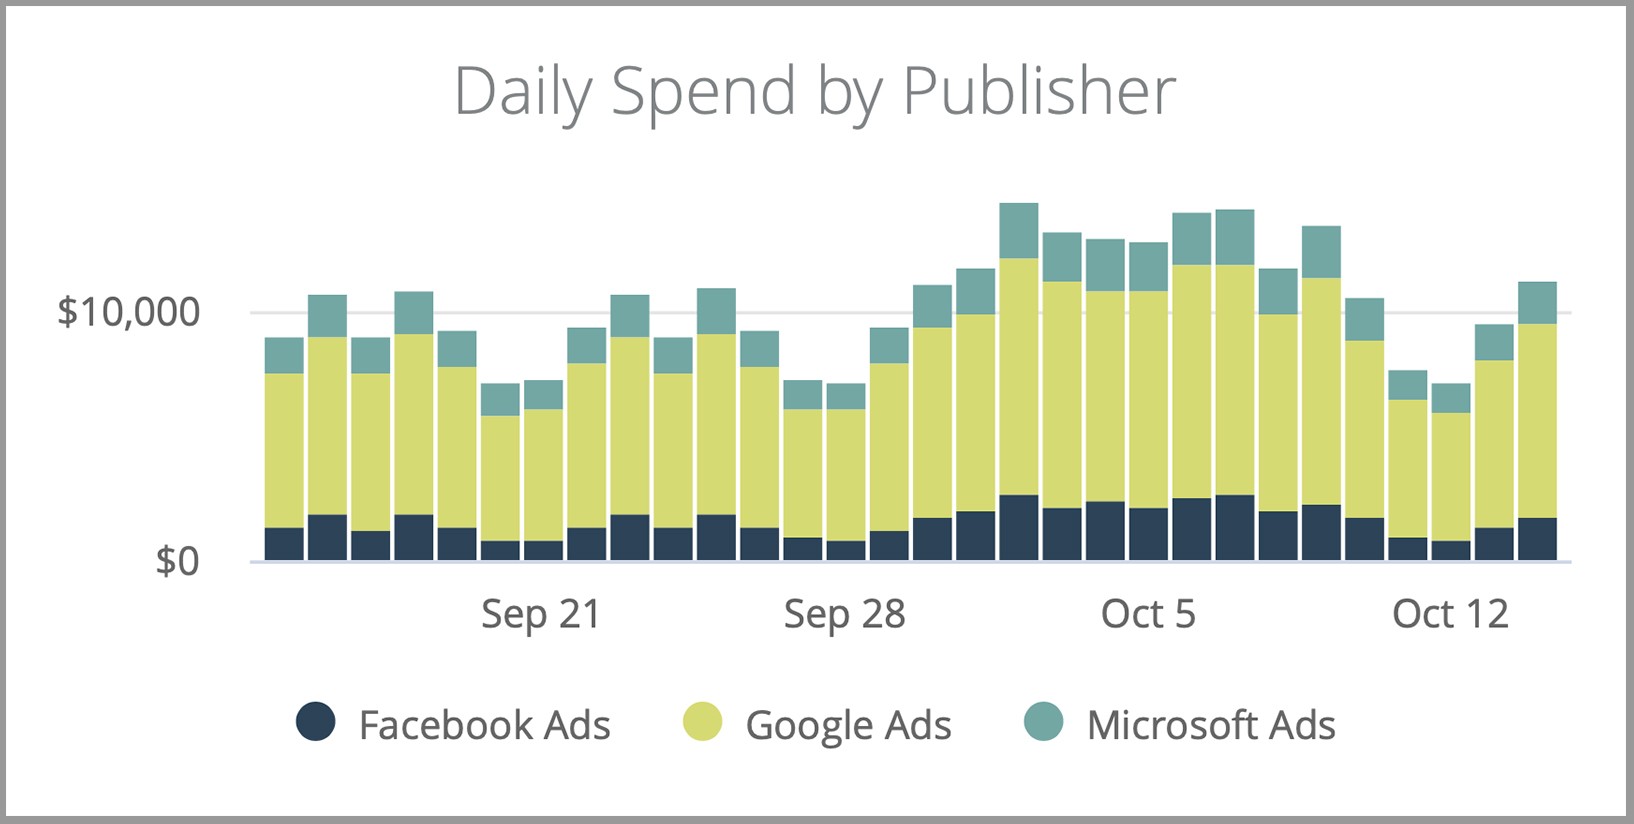 Marketing Manager Dashboard Component #2a:  Daily Spend by Publisher